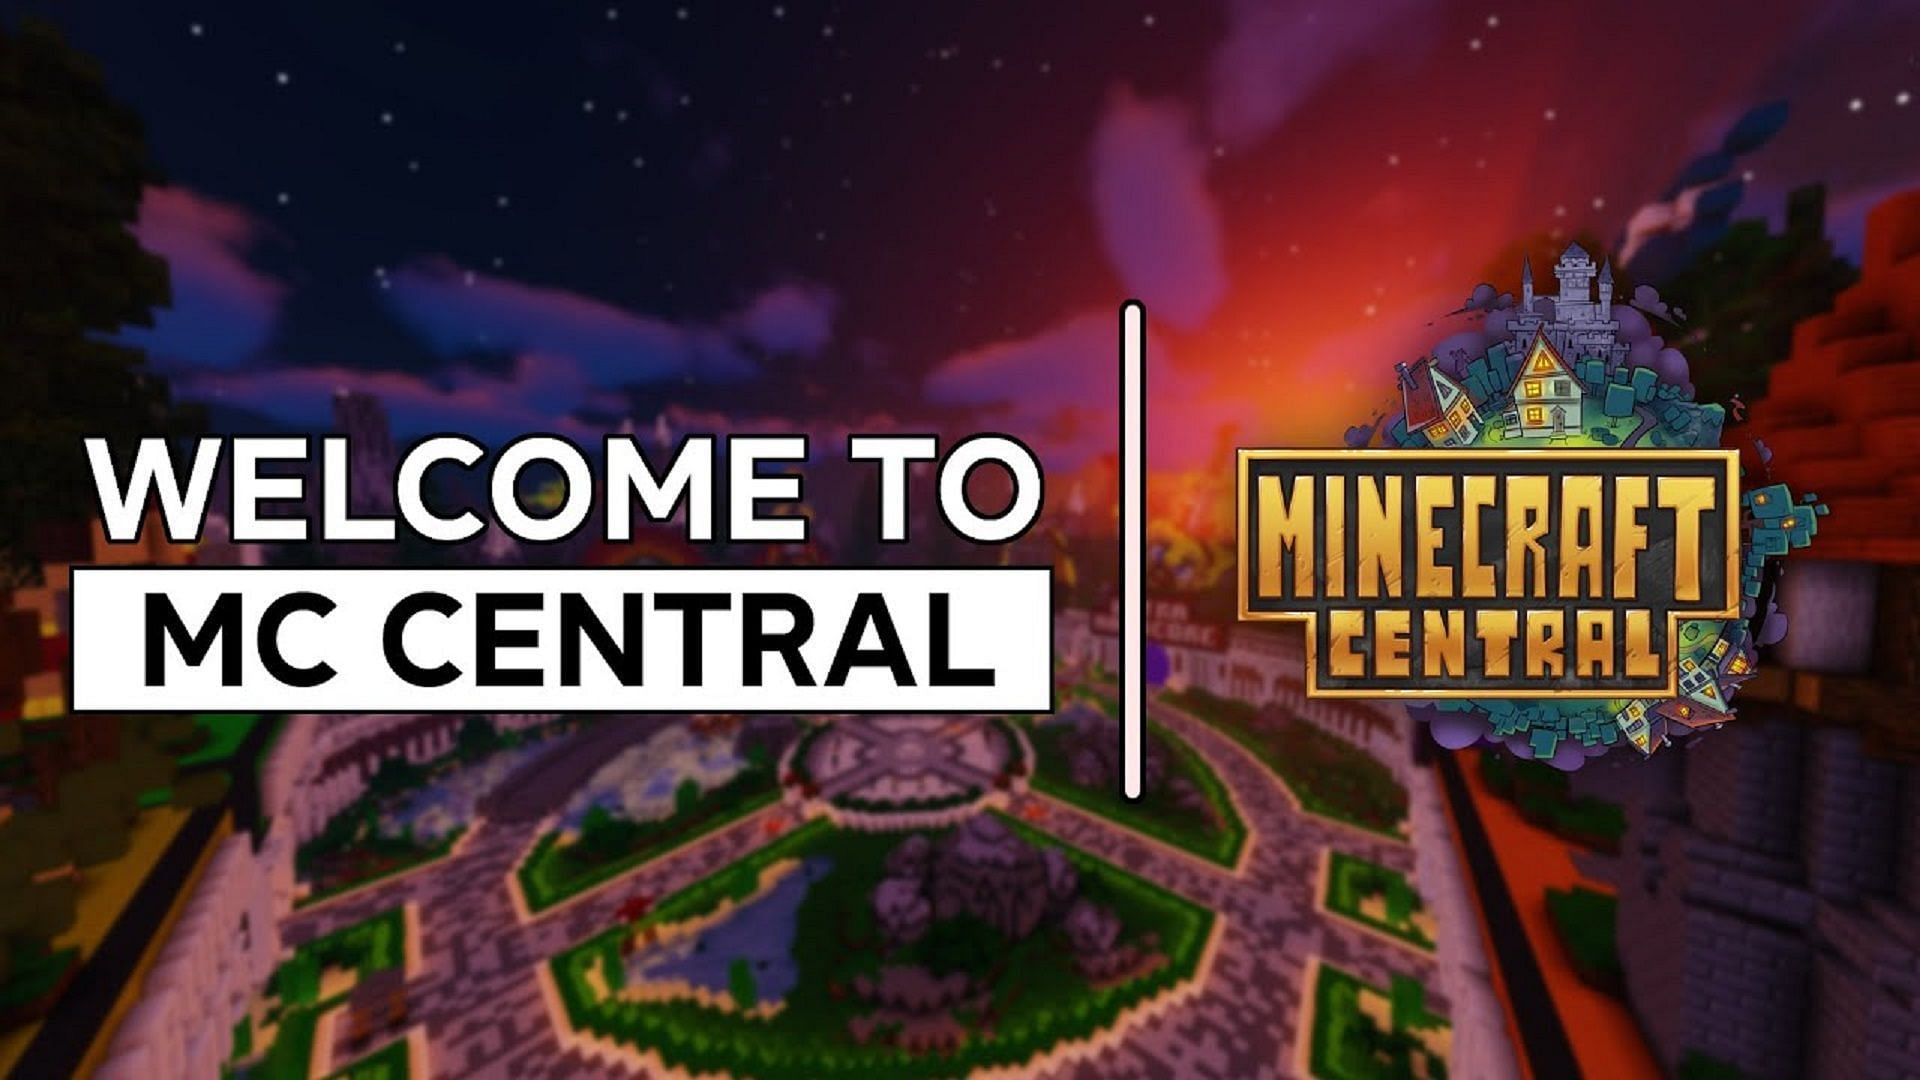 MC Central has remained one of the highest-rated Minecraft servers in the community (Image via MC Central)